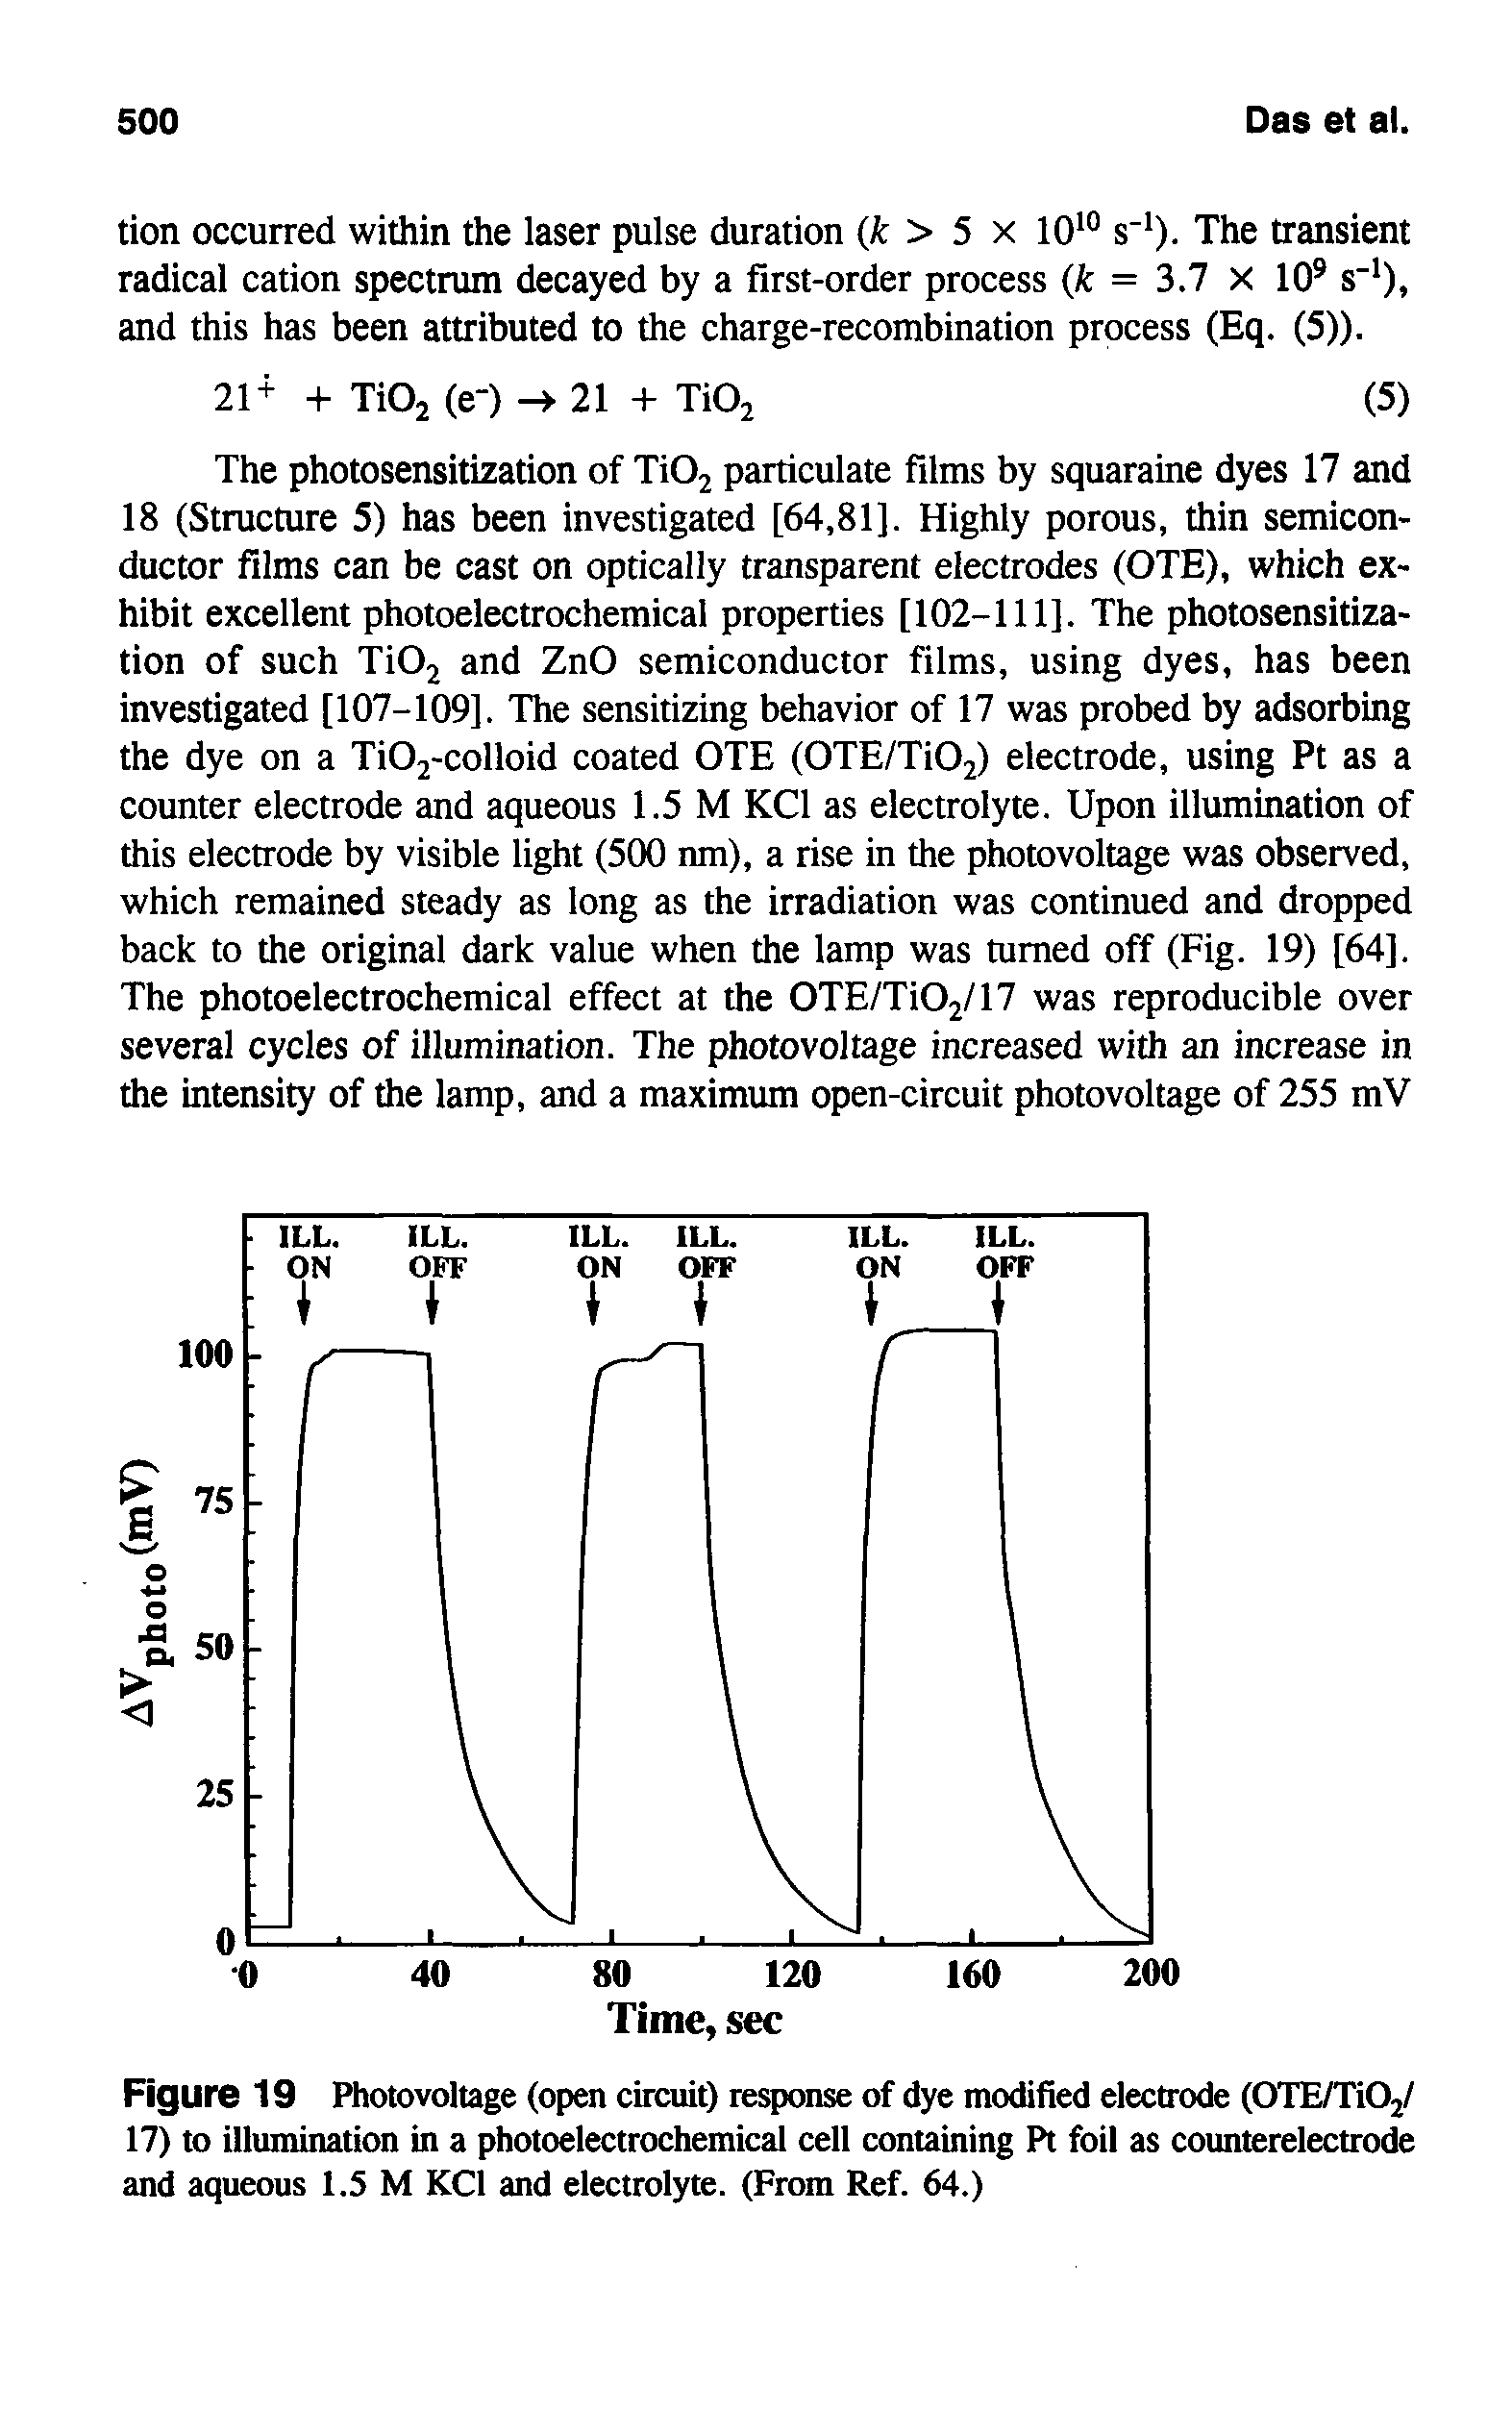 Figure 19 Photovoltage (open circuit) response of dye modified electrode (OTE/TiOj/ 17) to illiunination in a photoelectrochemical cell containing Pt foil as counterelectrode and aqueous 1.5 M KCl and electrolyte. (From Ref. 64.)...